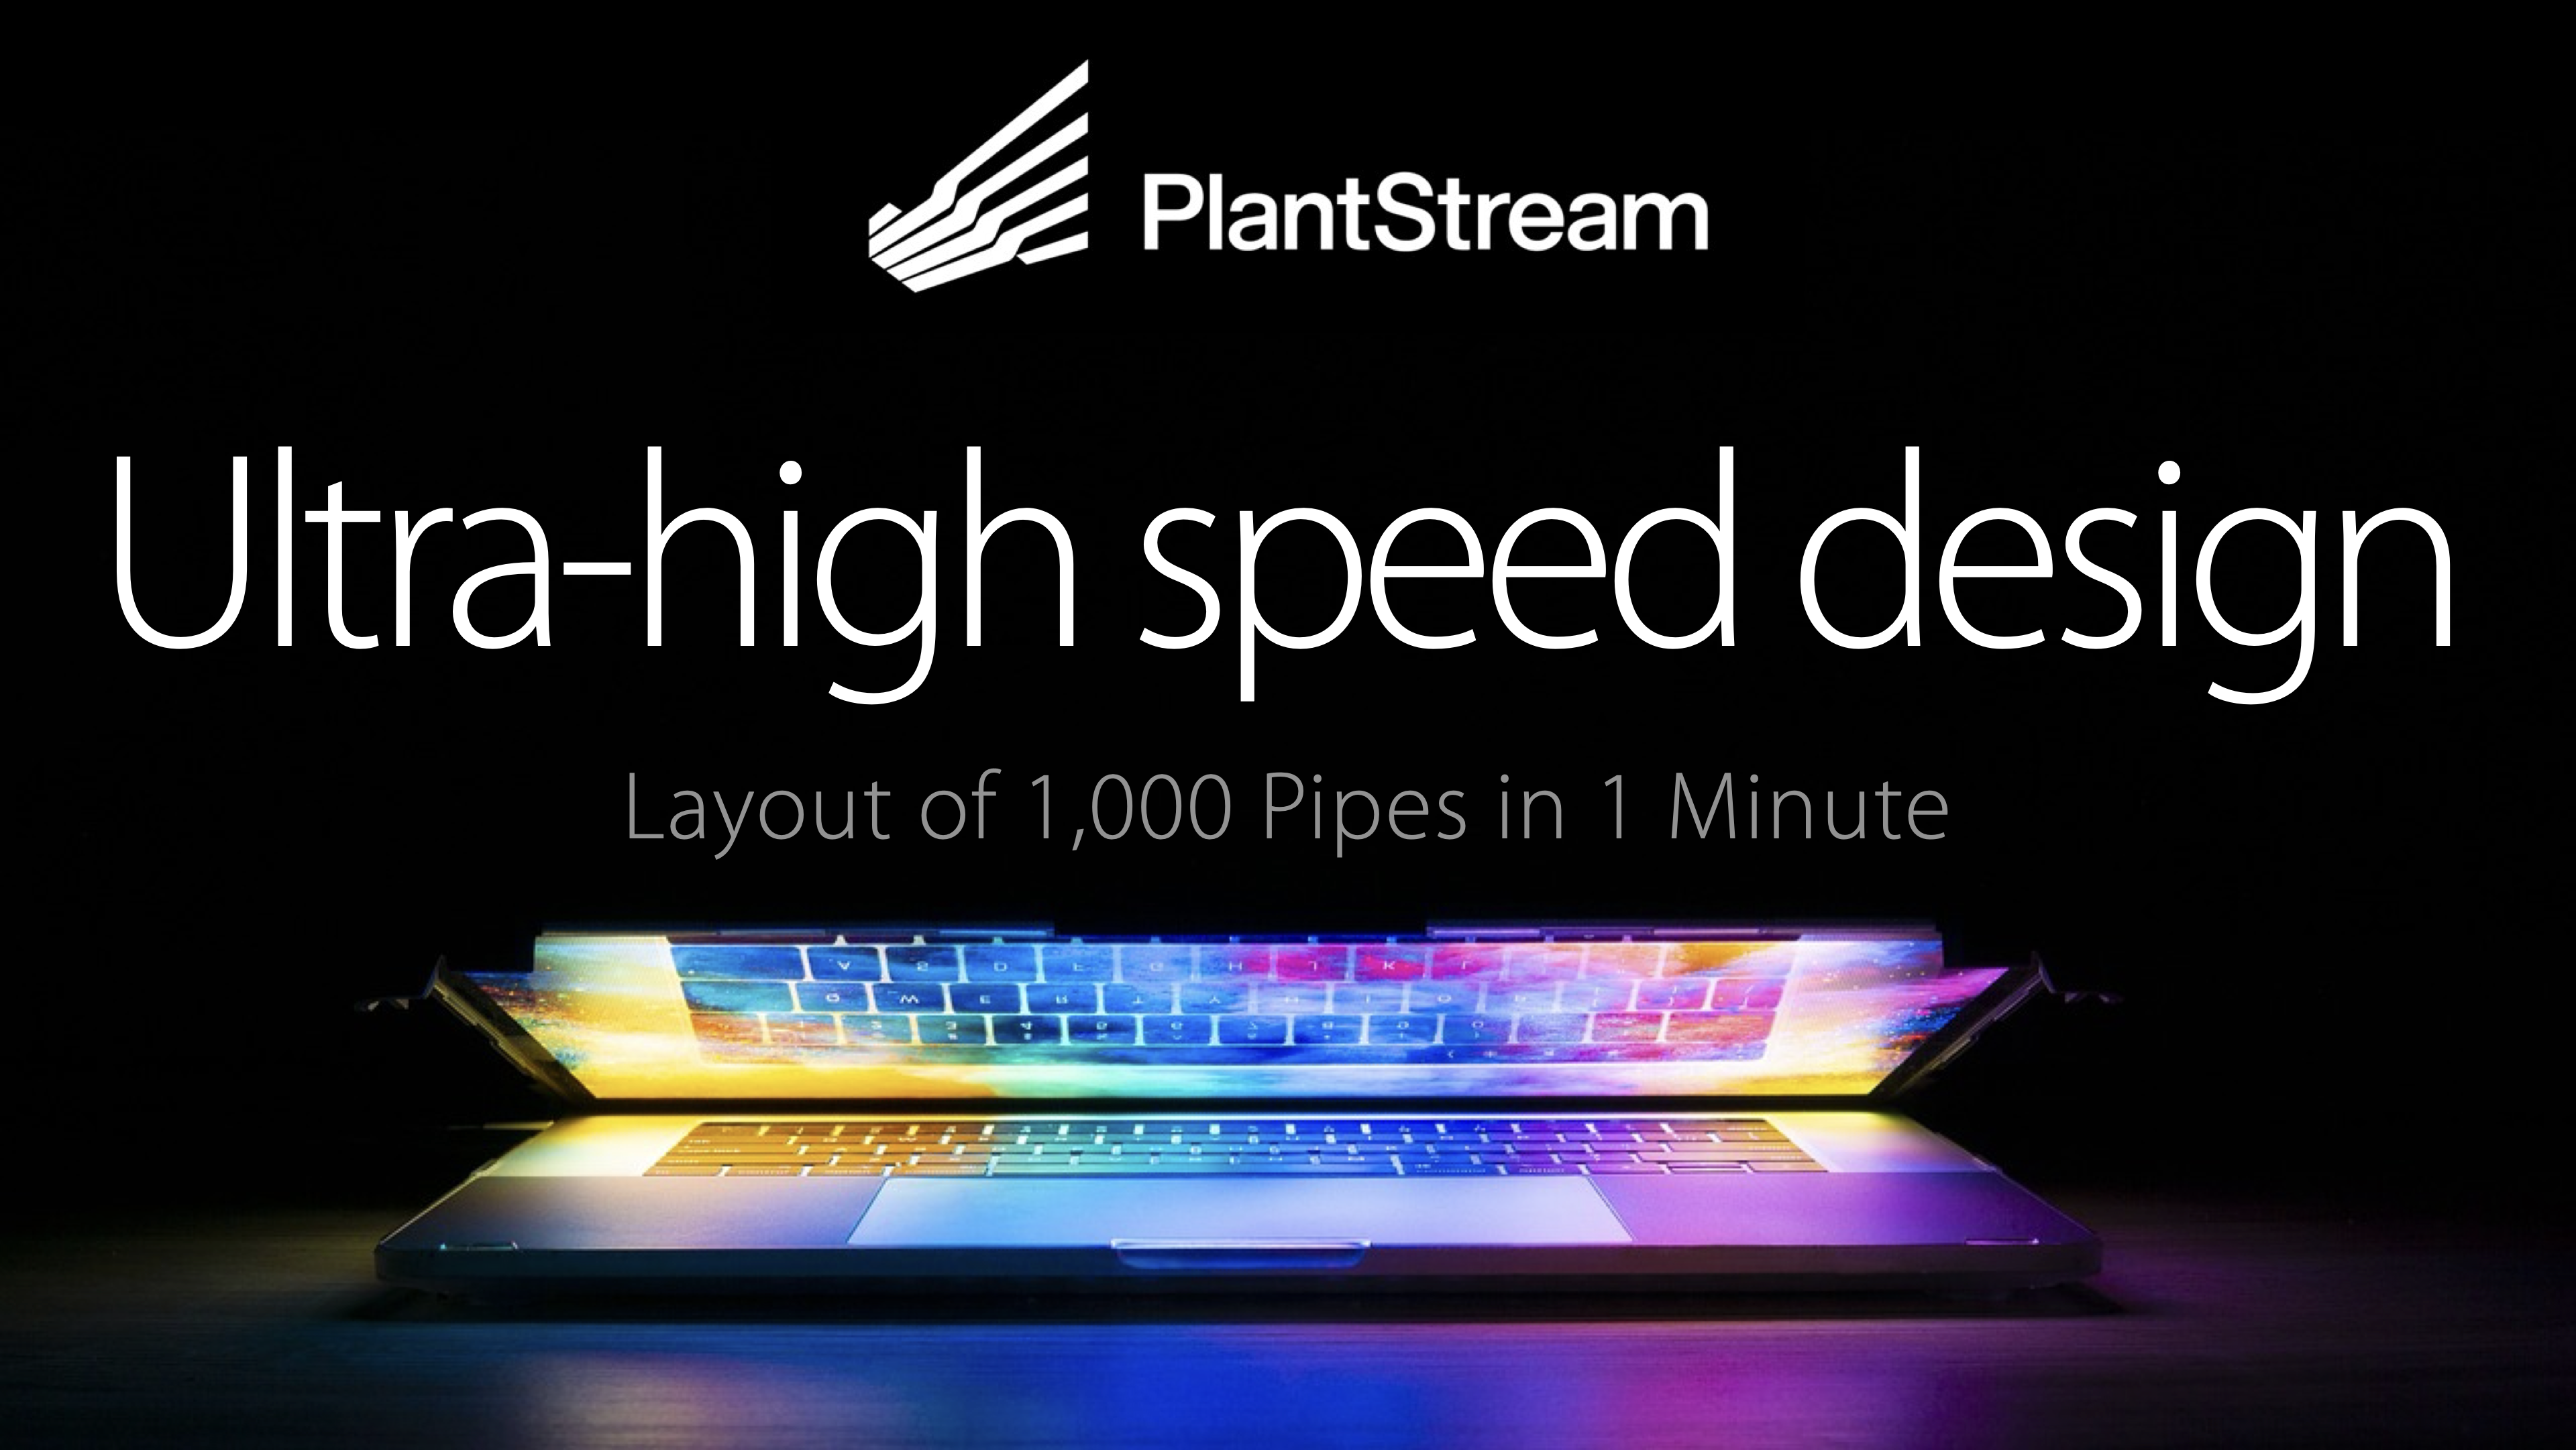 Miracles Could Happen In 1 Minute! PlantStream® Is a Genius 3D CAD System That Can Design 1,000 Pipes In an Instant, Even For a New User.